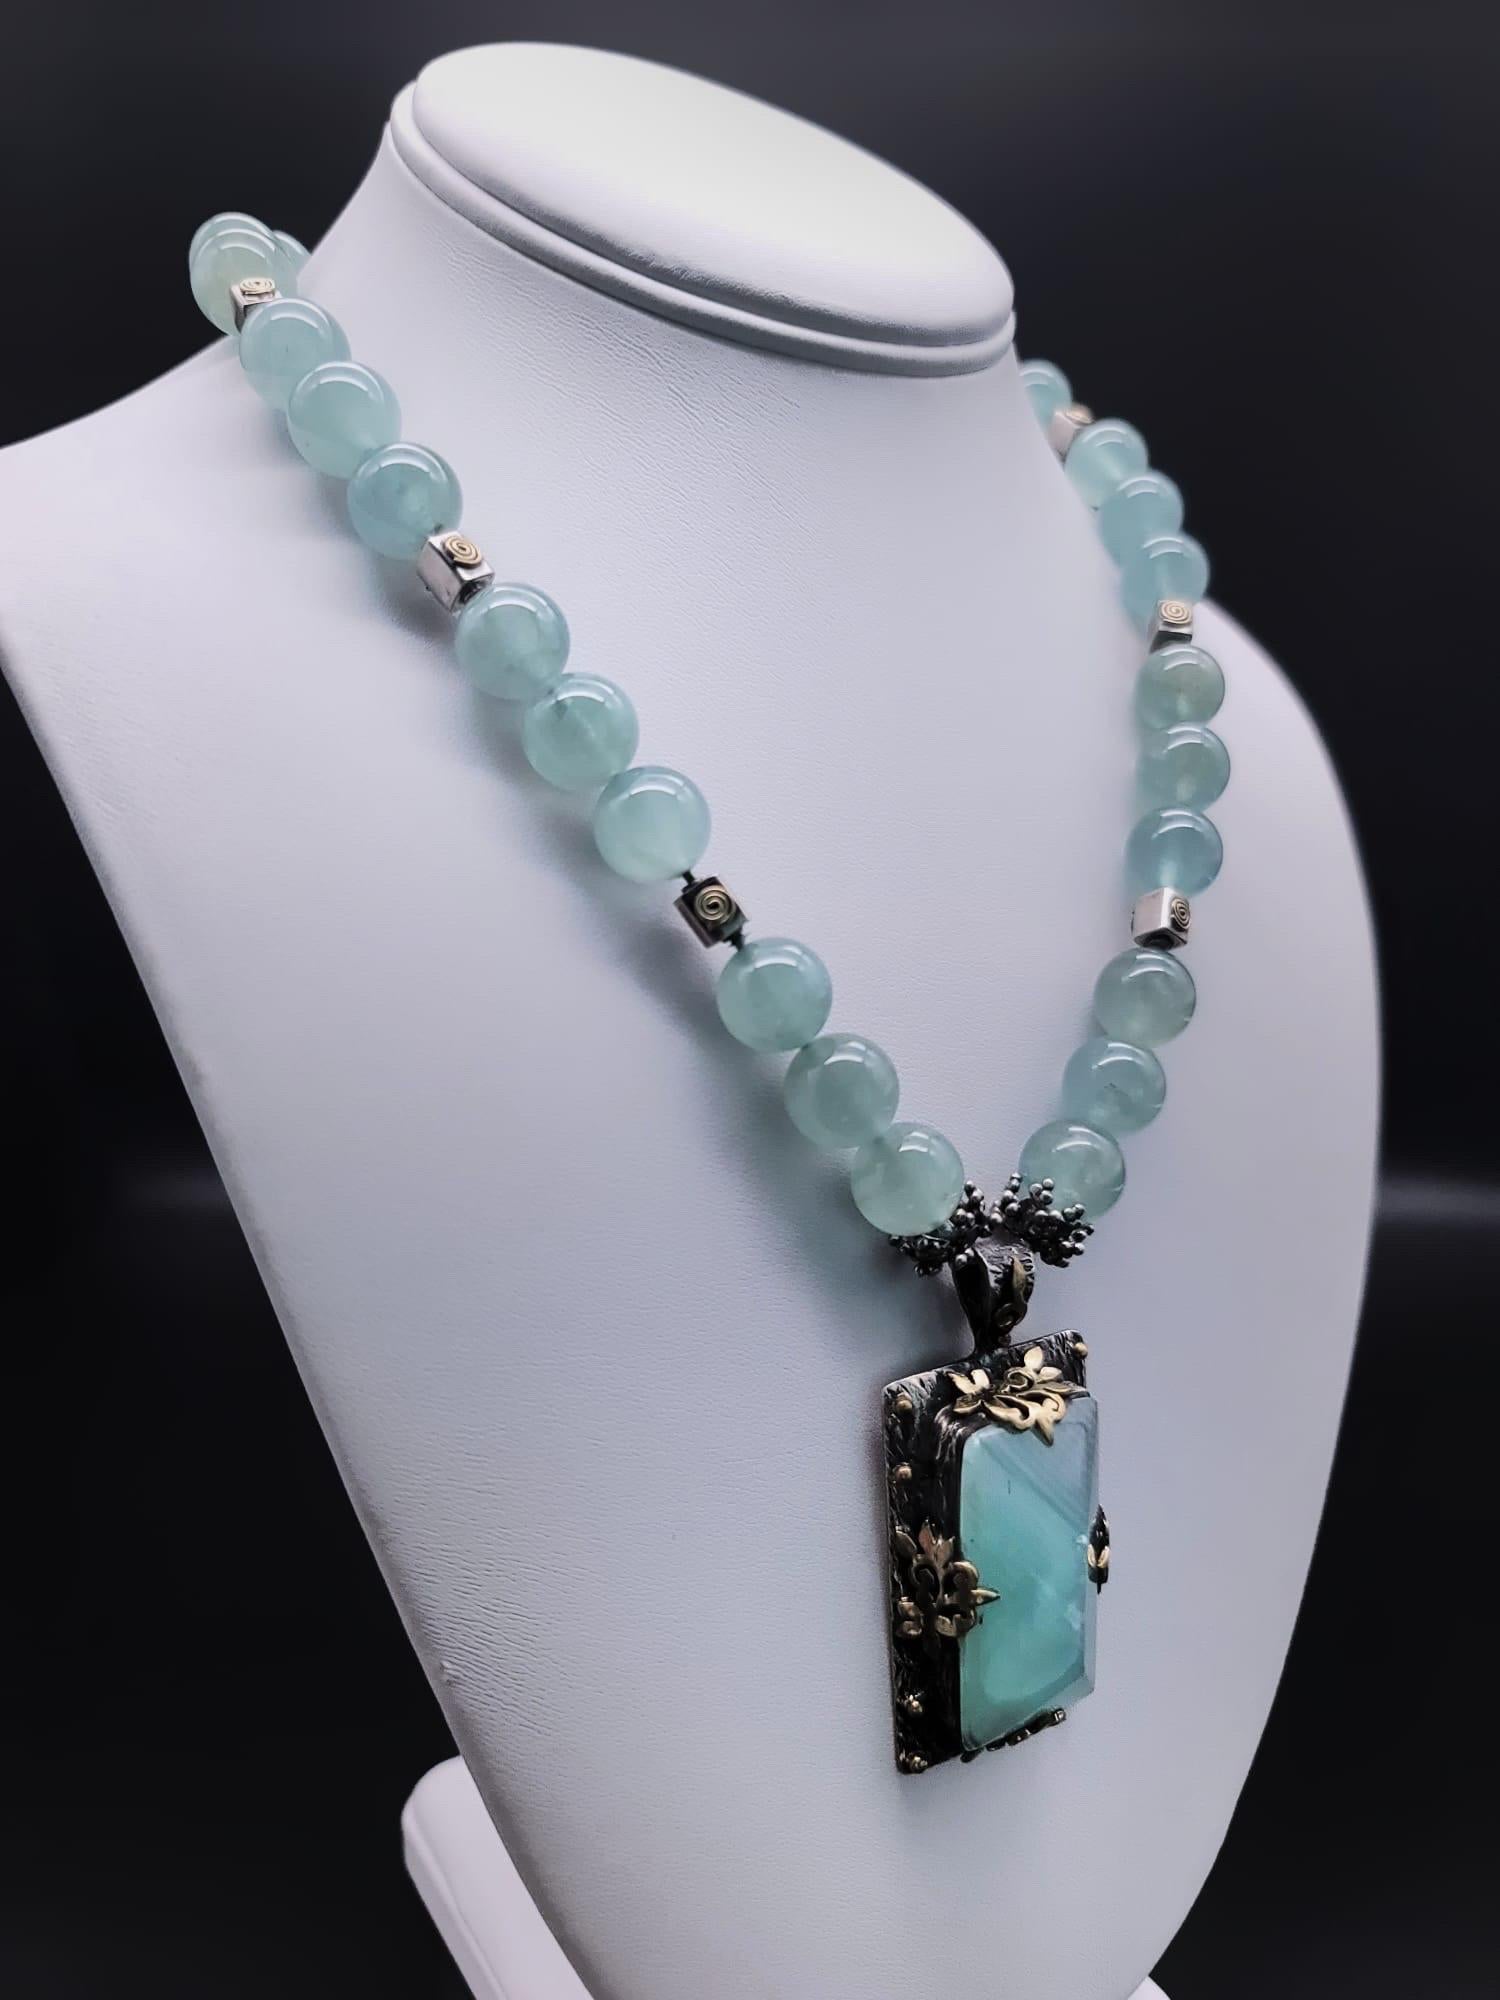 Discover the unparalleled beauty of this one-of-a-kind necklace, where delicate pale green Aquamarine beads unite with the commanding presence of a handcrafted Bora pendant. At its core, a gracefully polished, pyramid-shaped Moss Green Aquamarine